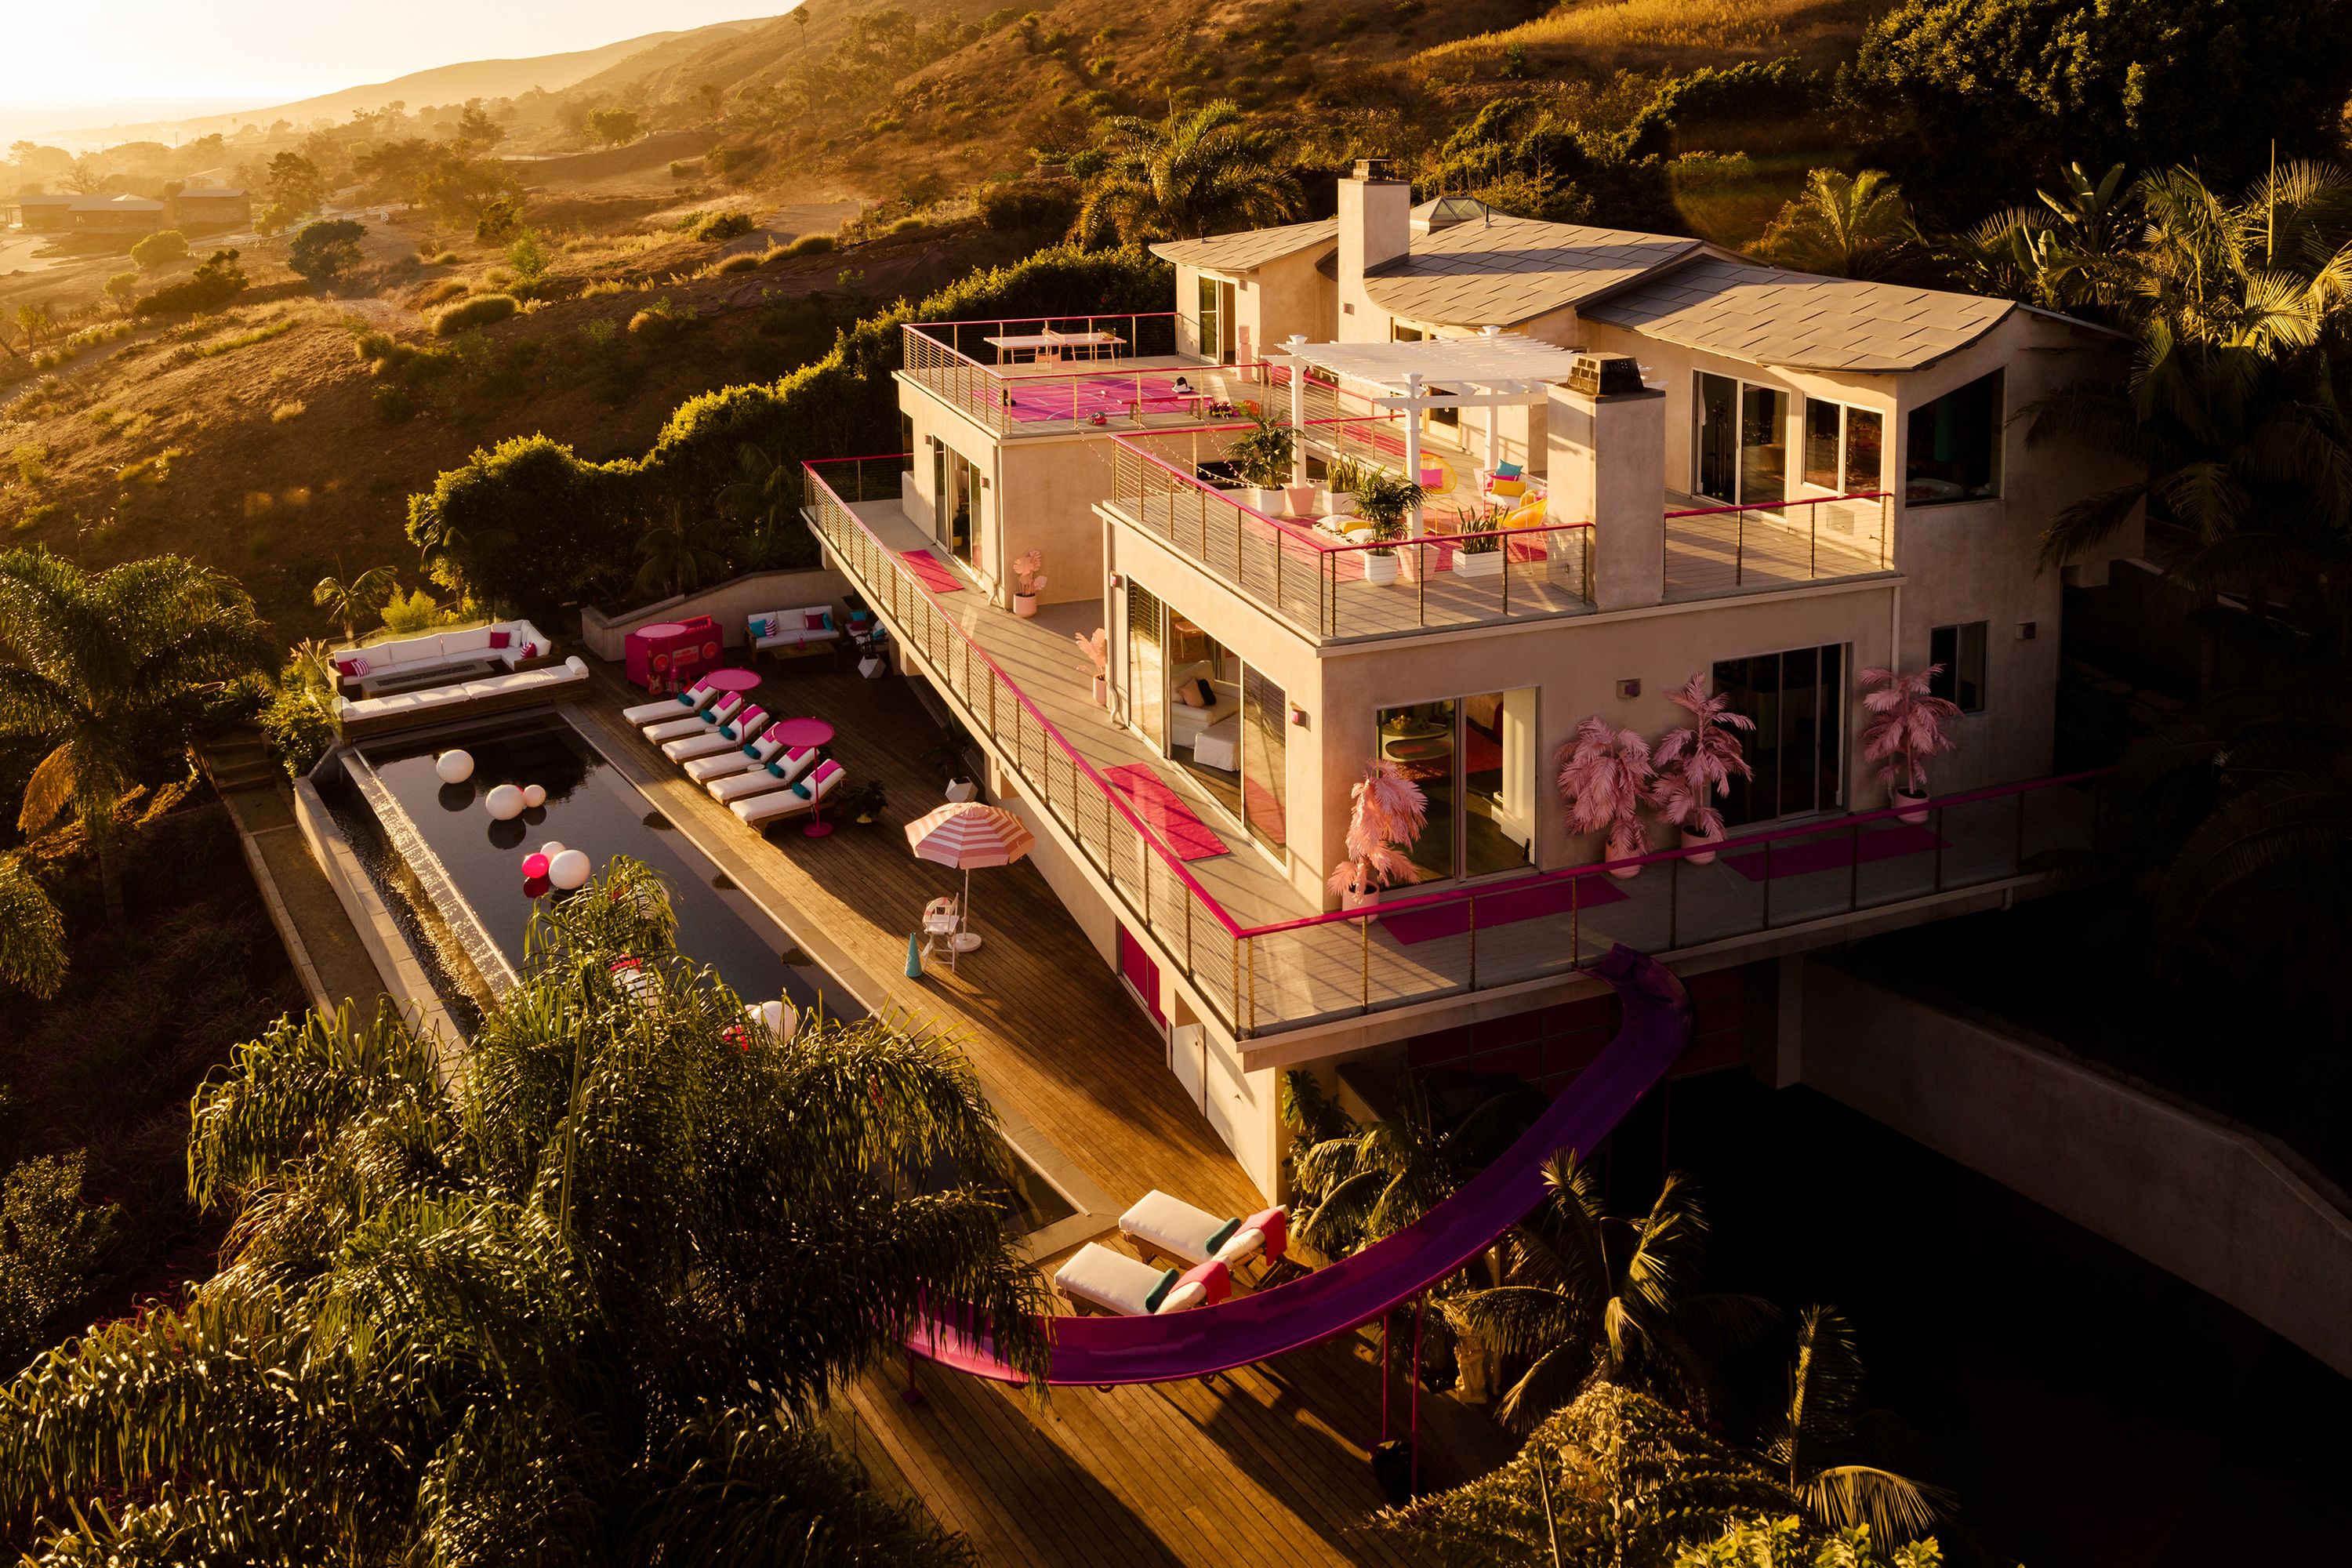 Barbie's Malibu DreamHouse is back on Airbnb – but this time